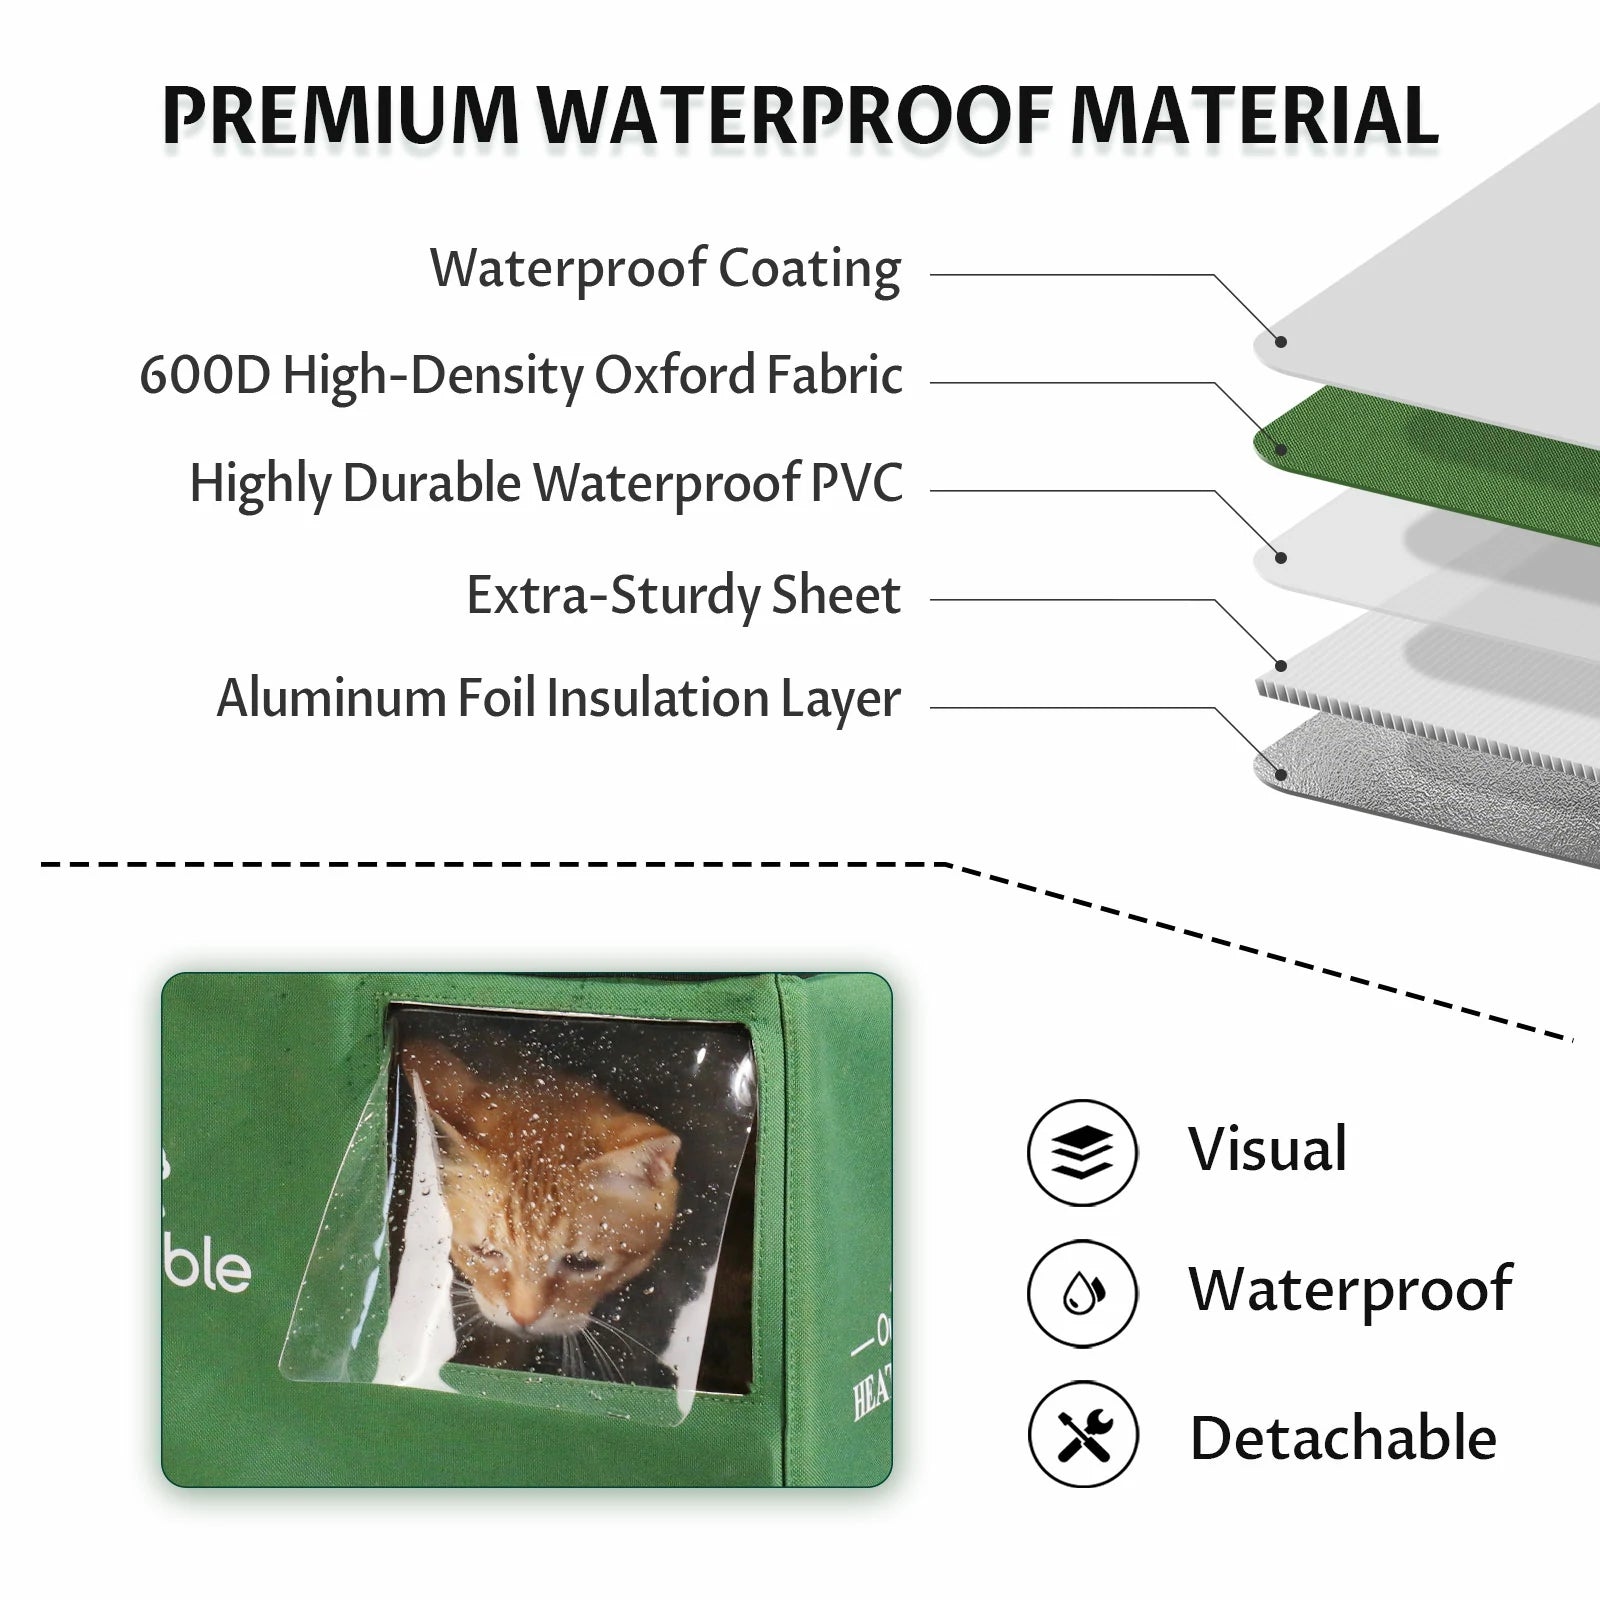 2 in 1 Outdoor Elevated Portable Heated Cat House Medium